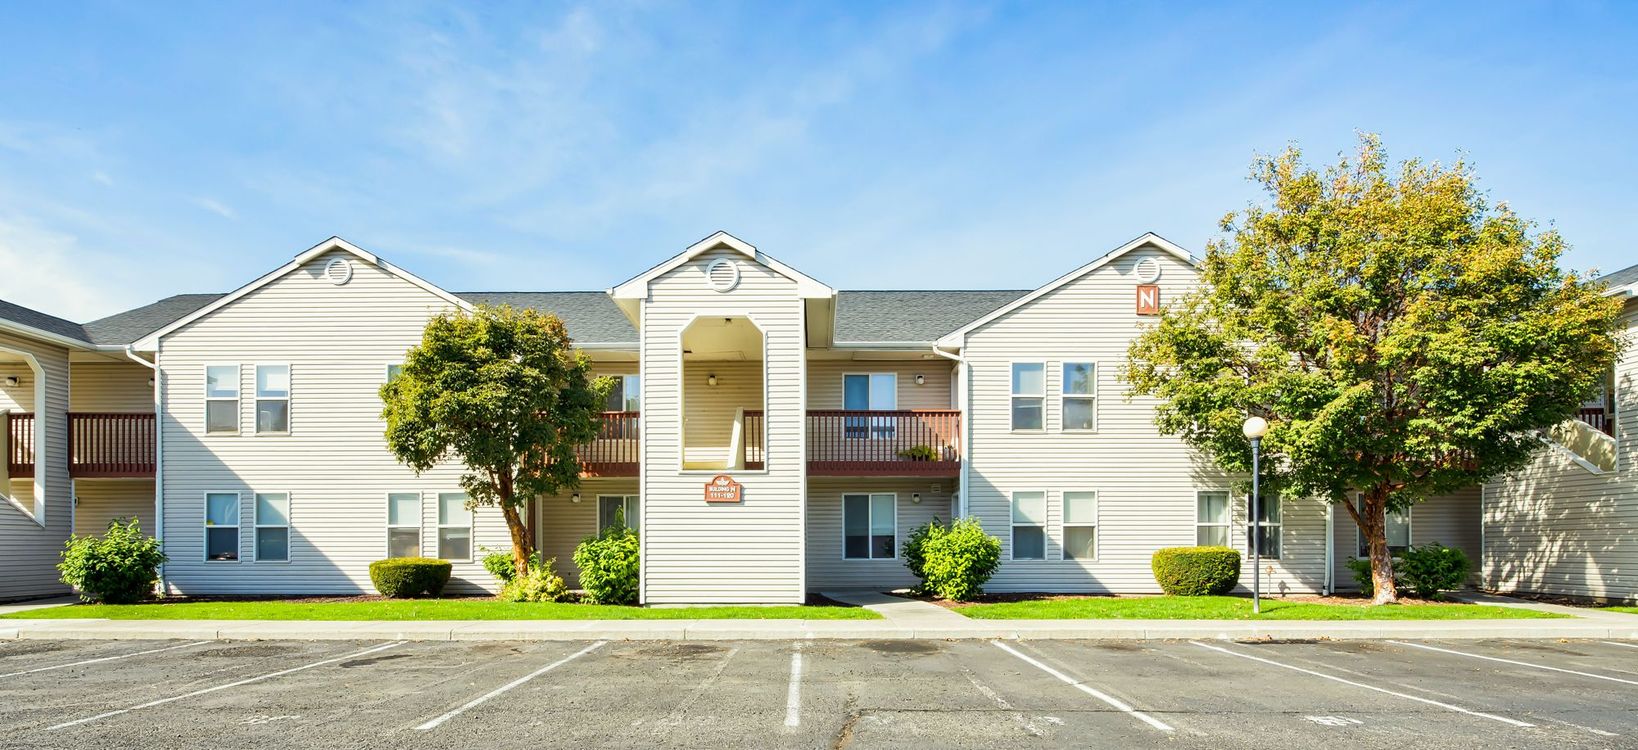 yakima apartments for rent